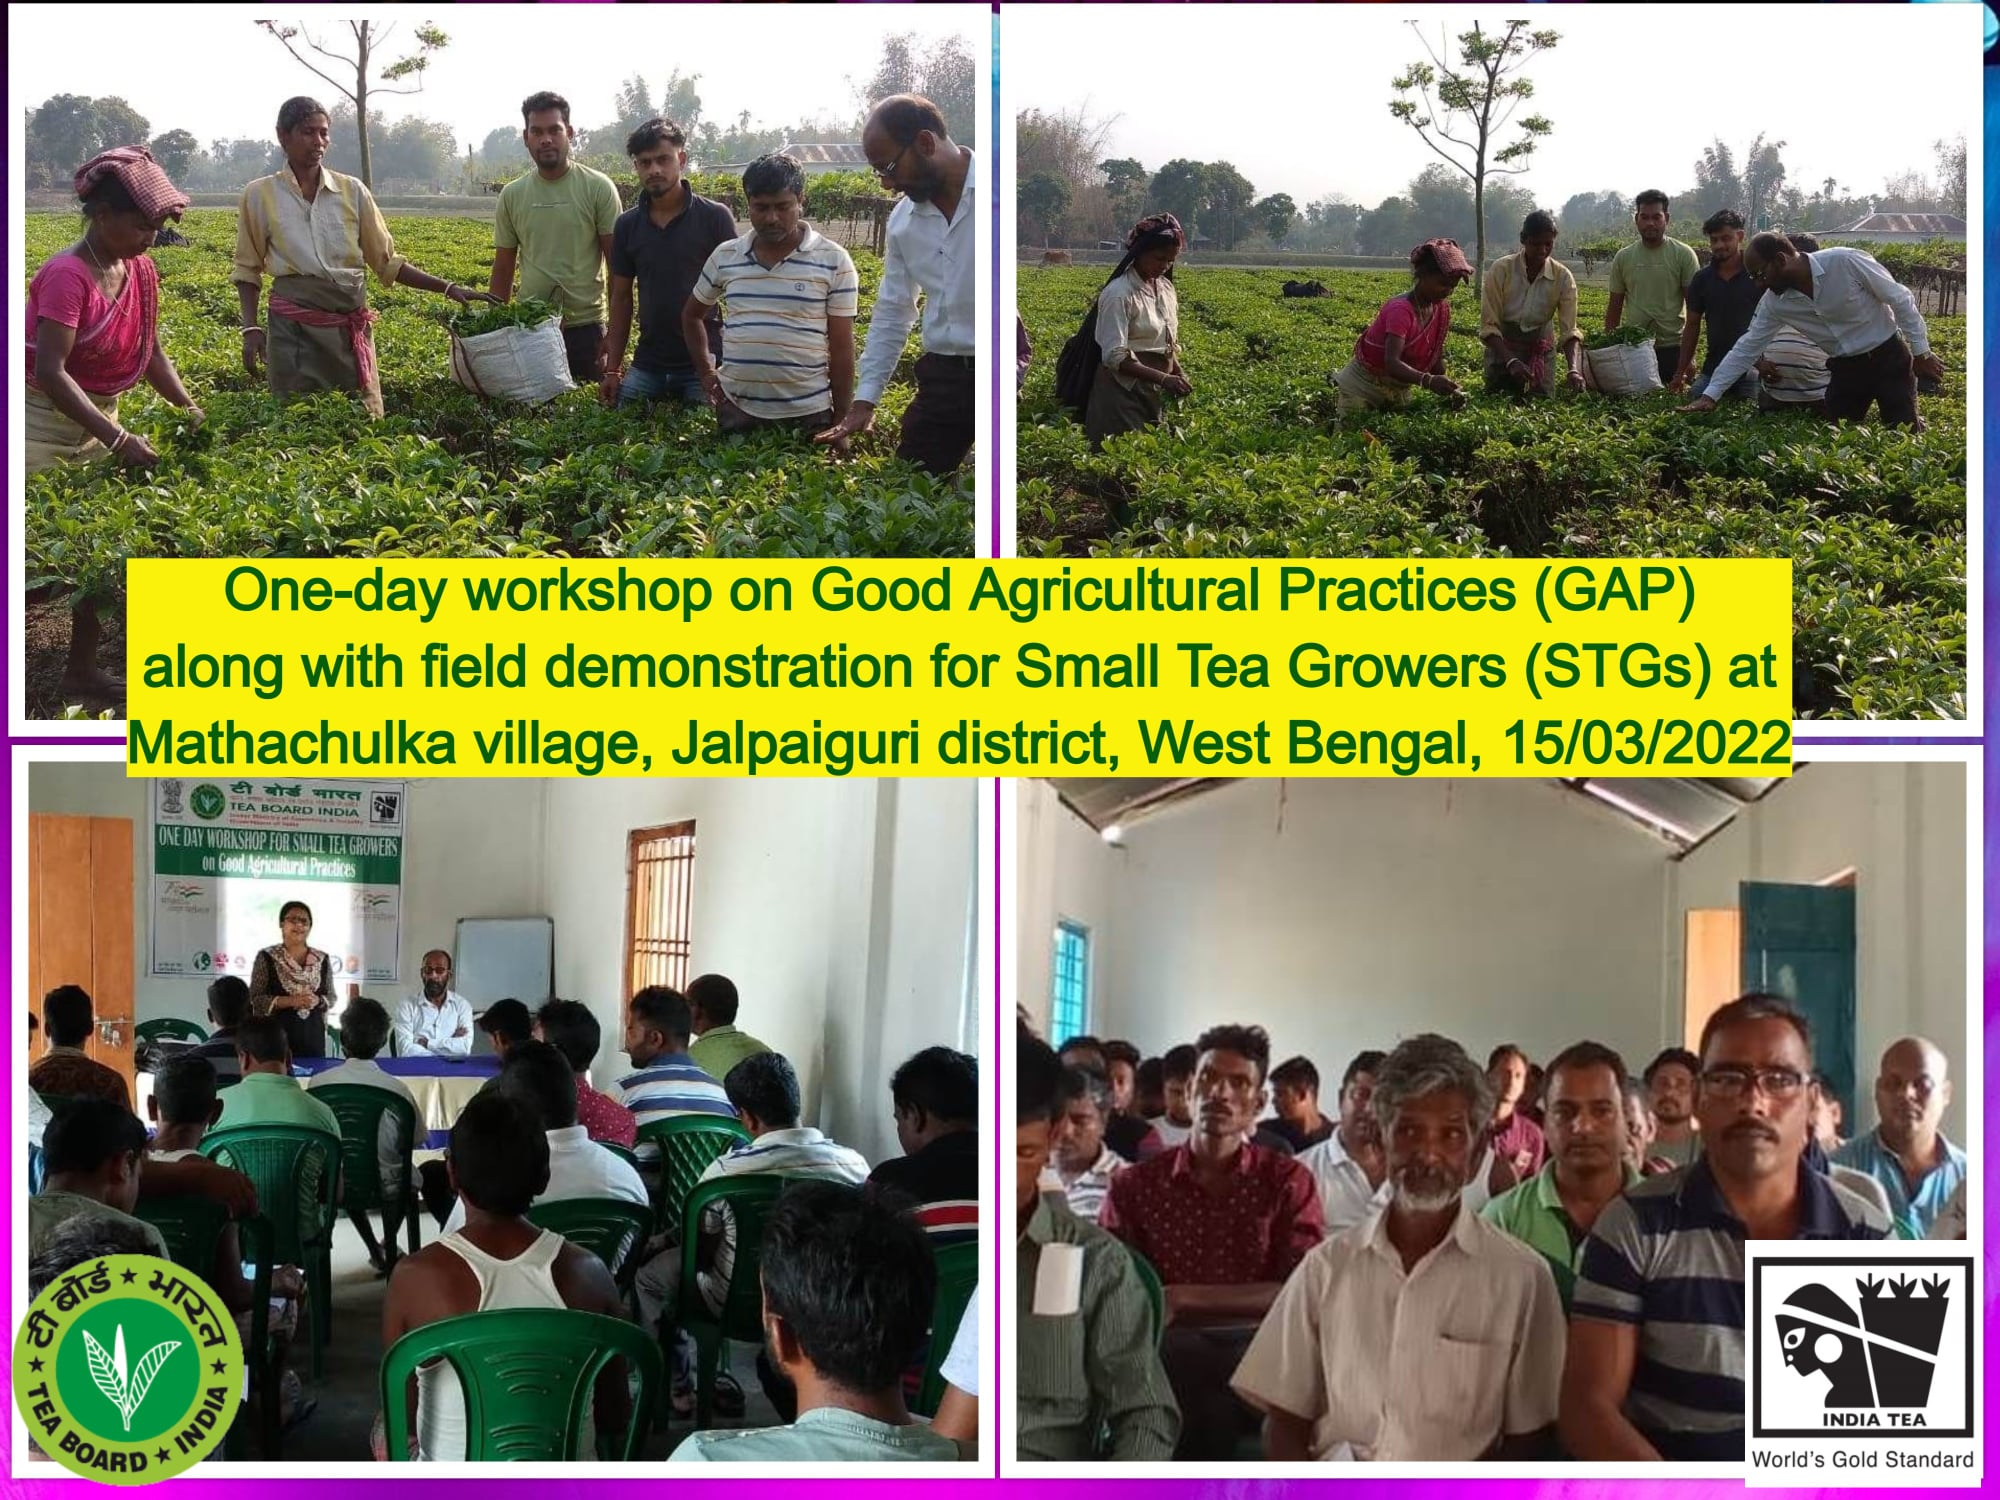 One-day workshop on Good Agricultural Practices (GAP) along with field demonstration for Small Tea Growers (STGs) at Mathachulka village, Jalpaiguri district, West Bengal, 15-03-2022